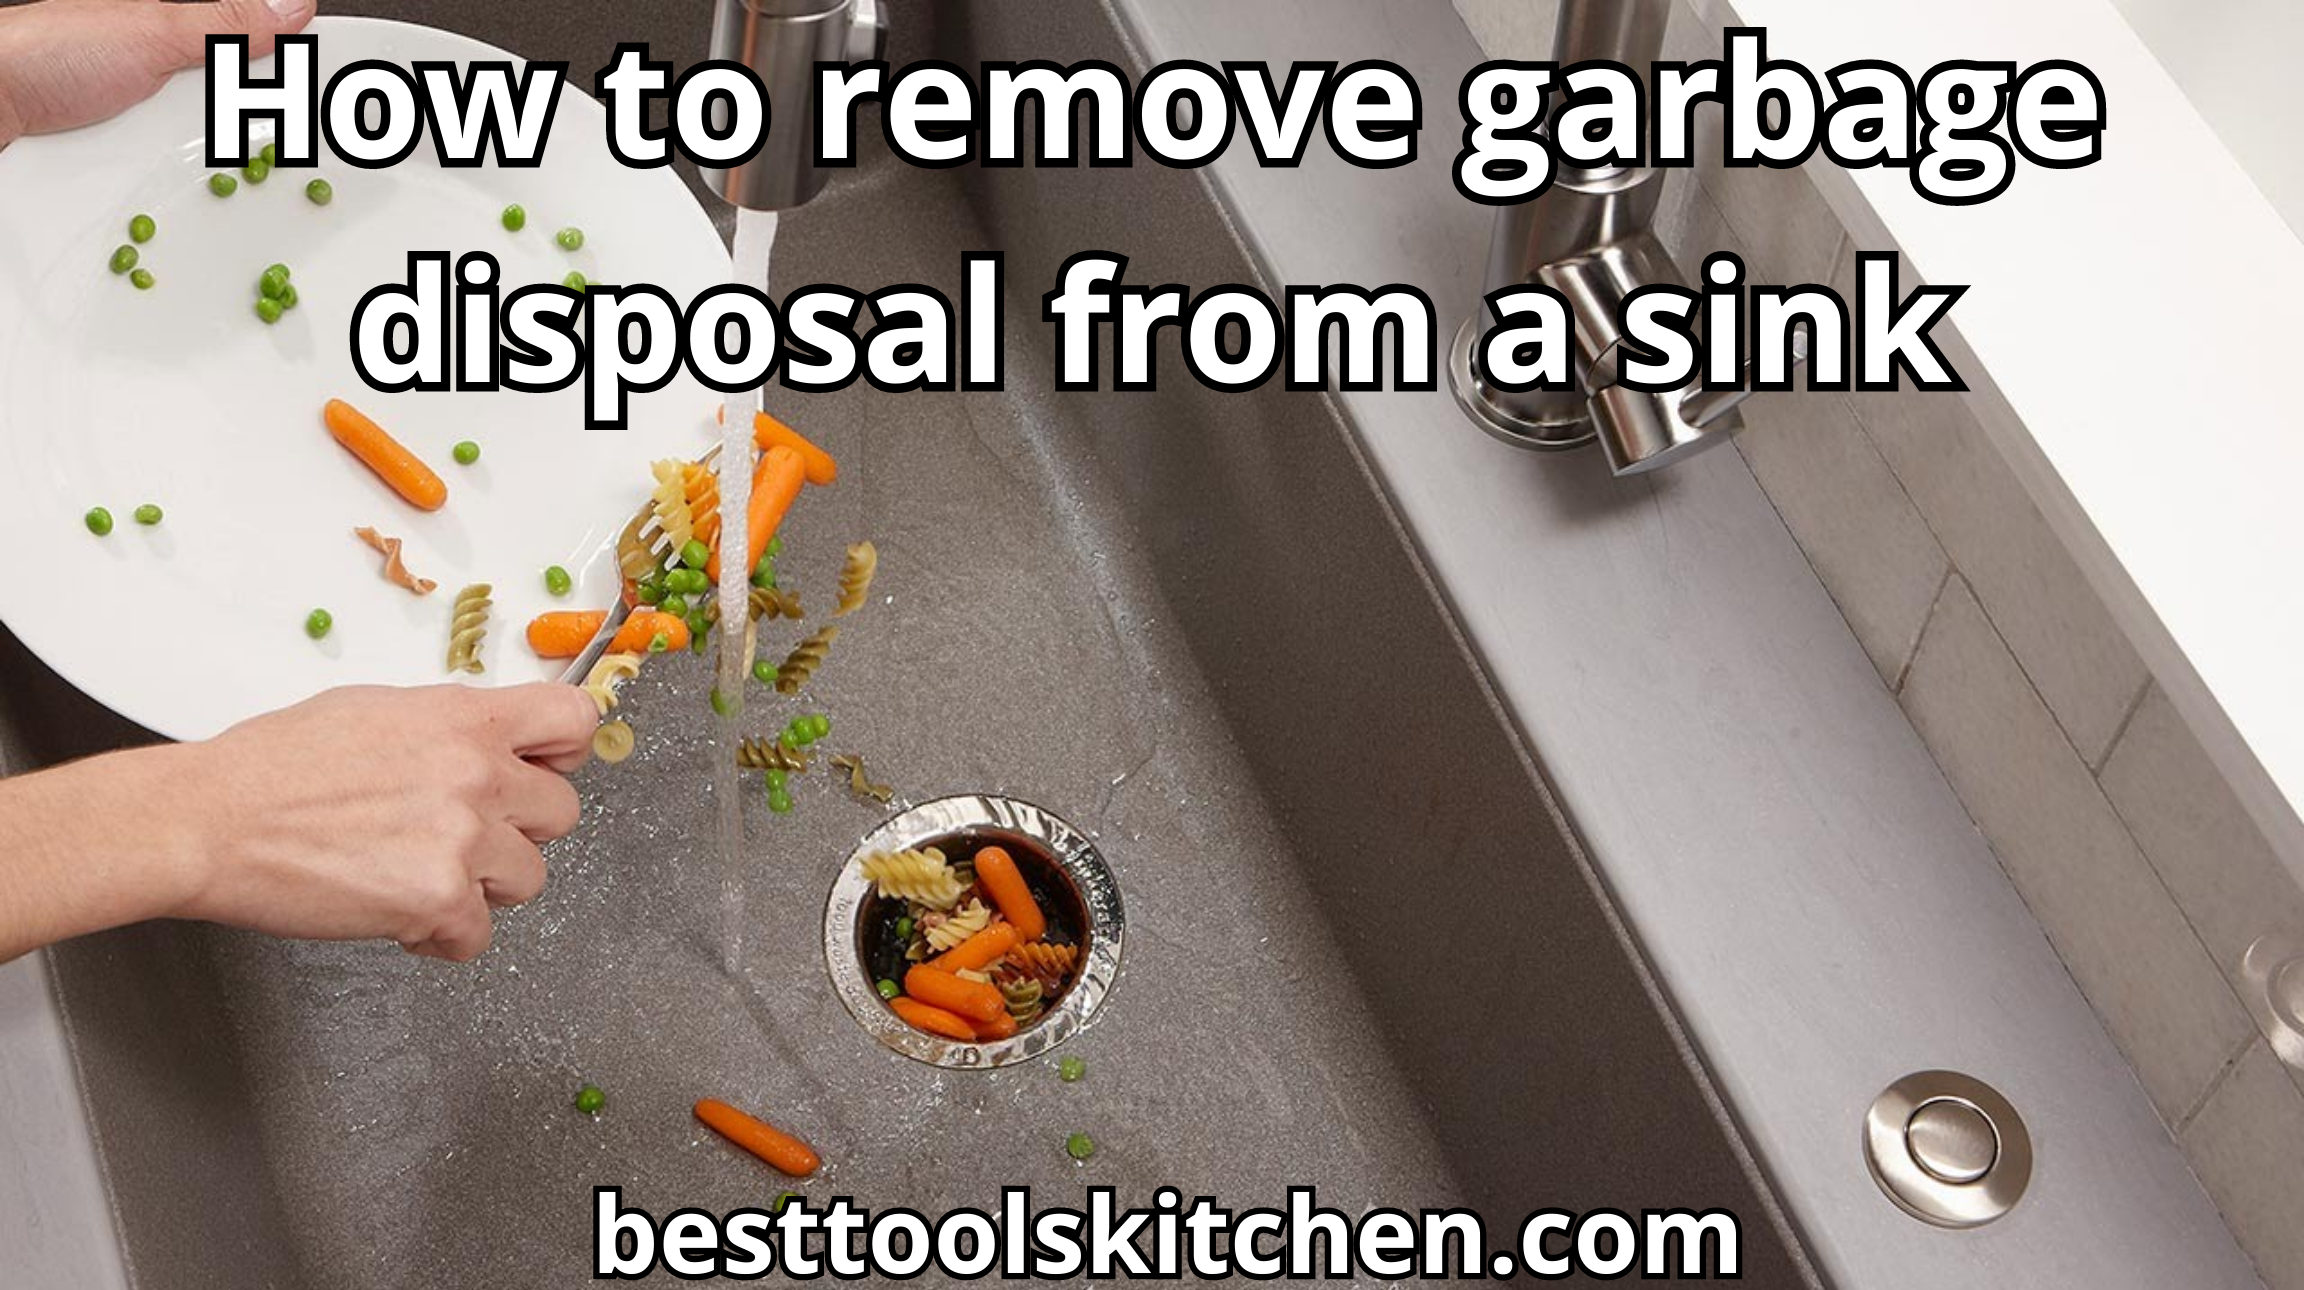 How to remove garbage disposal from a sink